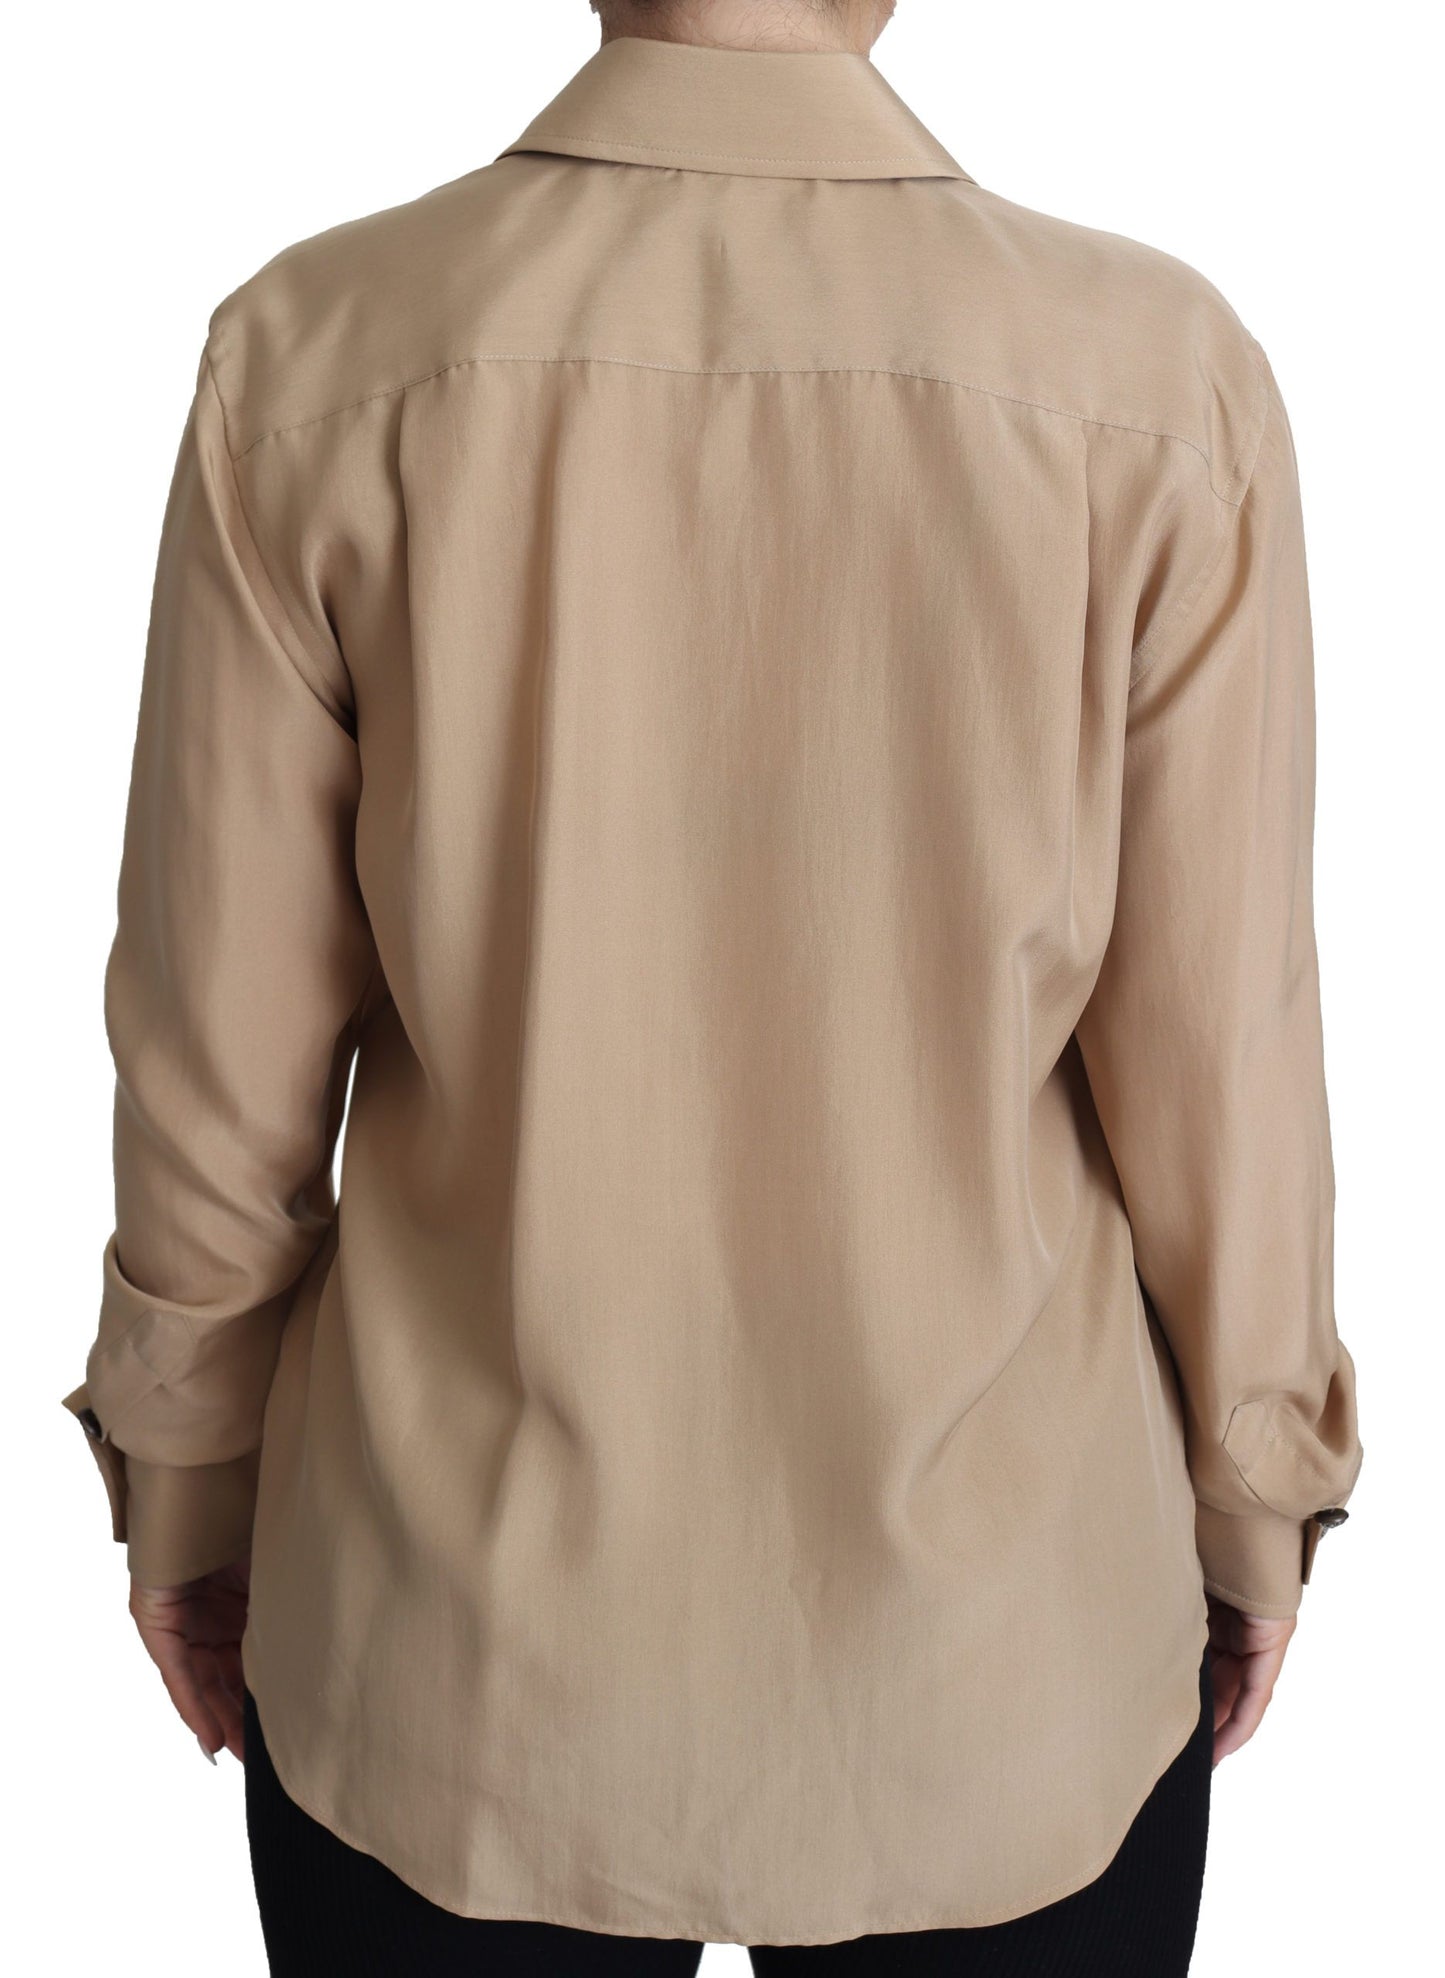 Beige Silk Shirt Decorative Buttons Top - Designed by Dolce & Gabbana Available to Buy at a Discounted Price on Moon Behind The Hill Online Designer Discount Store